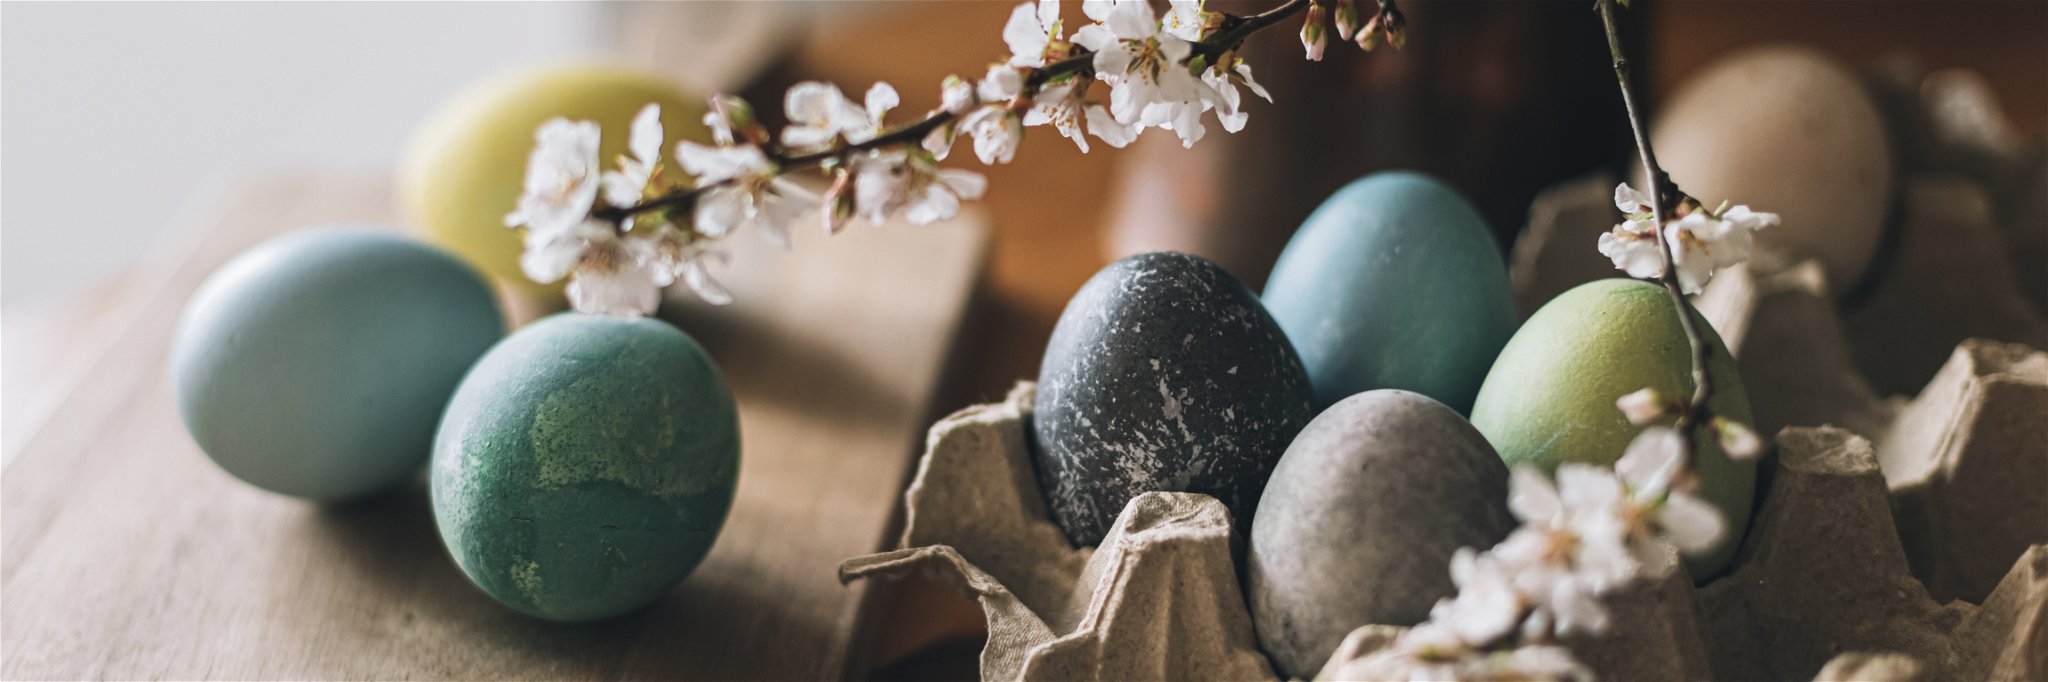 Easter is a symbol of new life, fertility and rebirth.